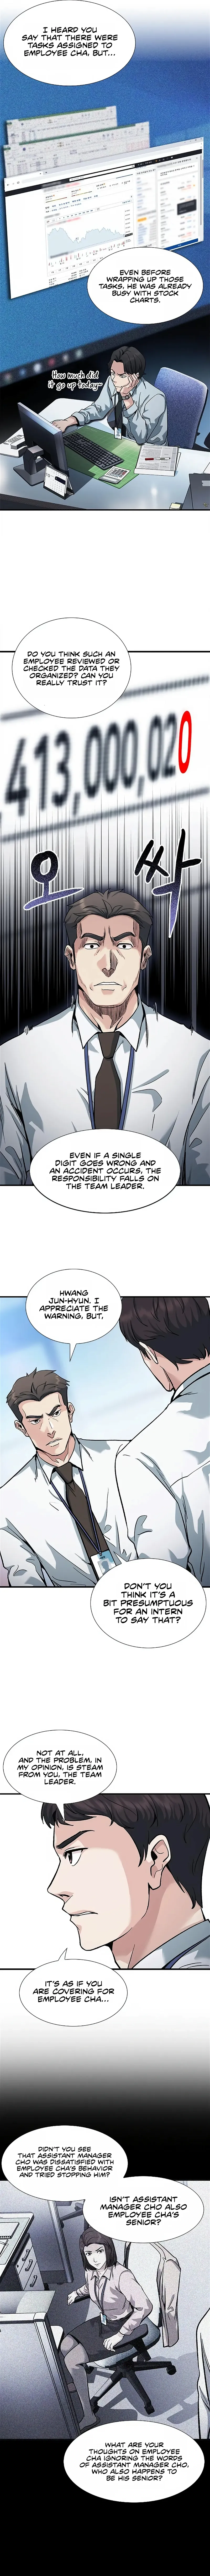 Chairman Kang: The Newcomer Chapter 3 page 12